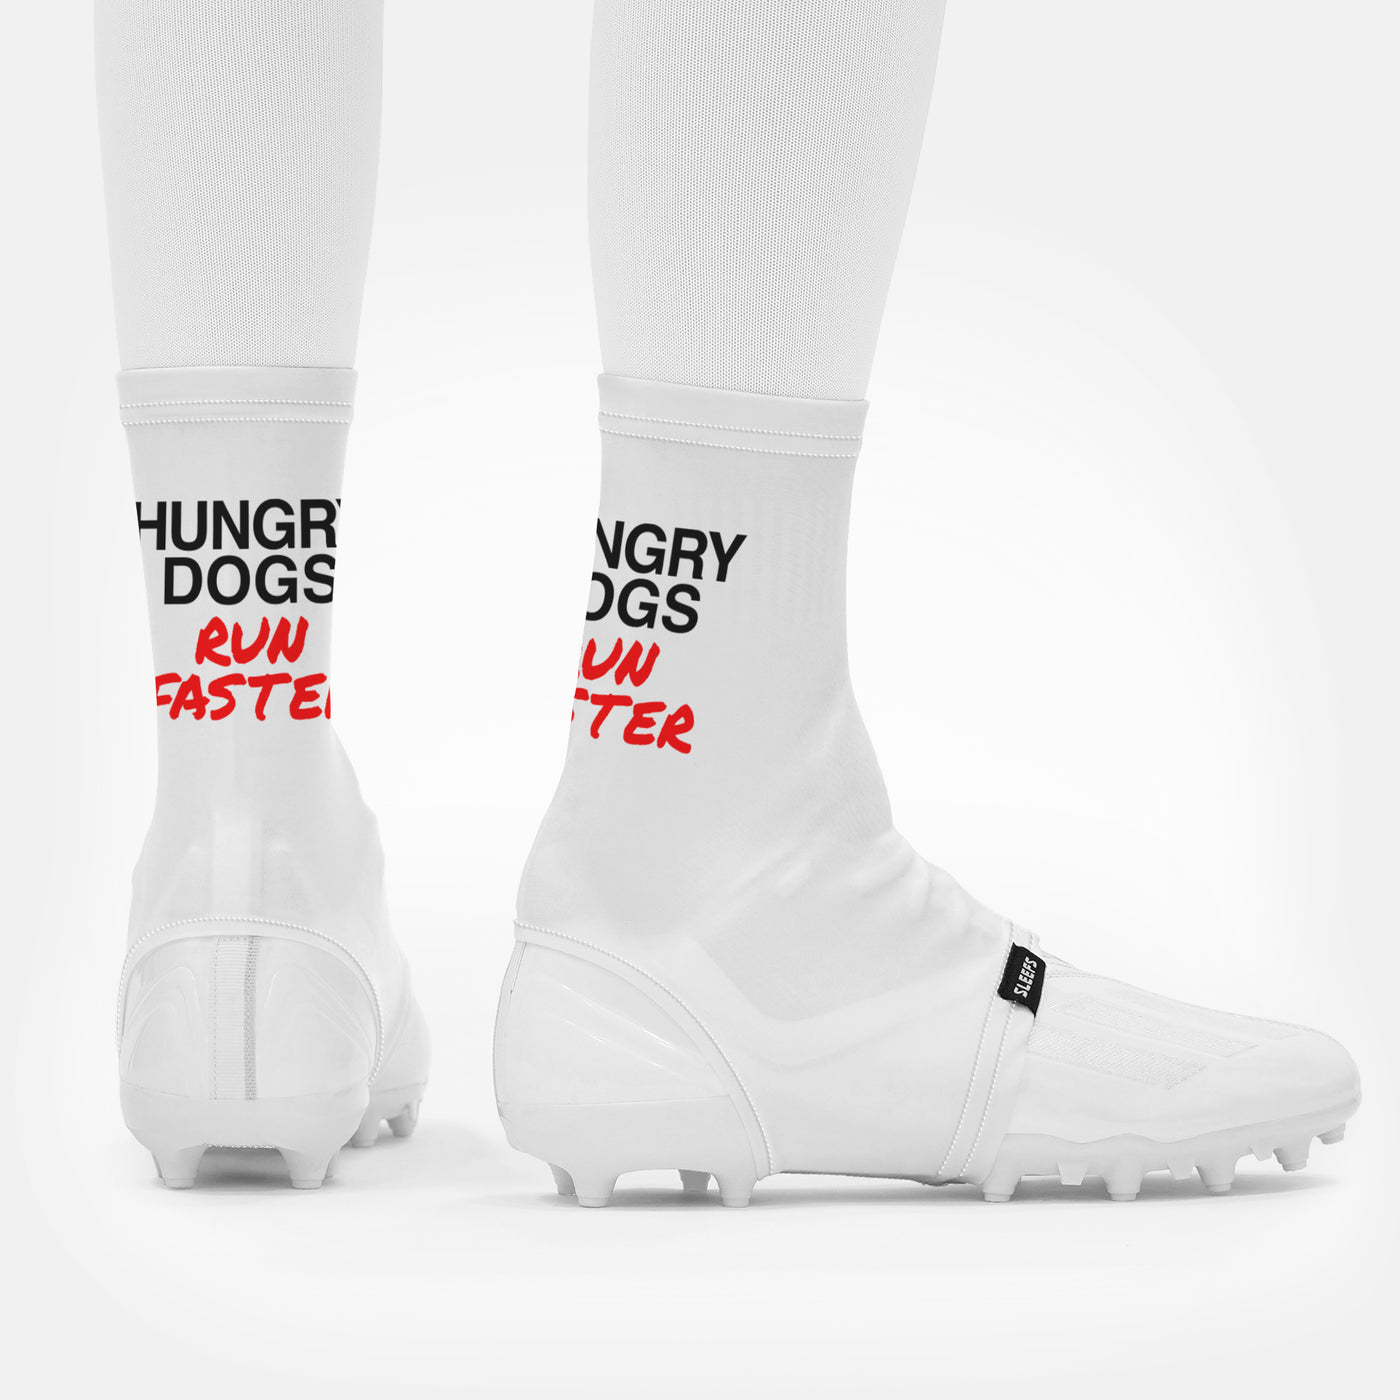 Hungry Dogs Run Faster Spats / Cleat Covers